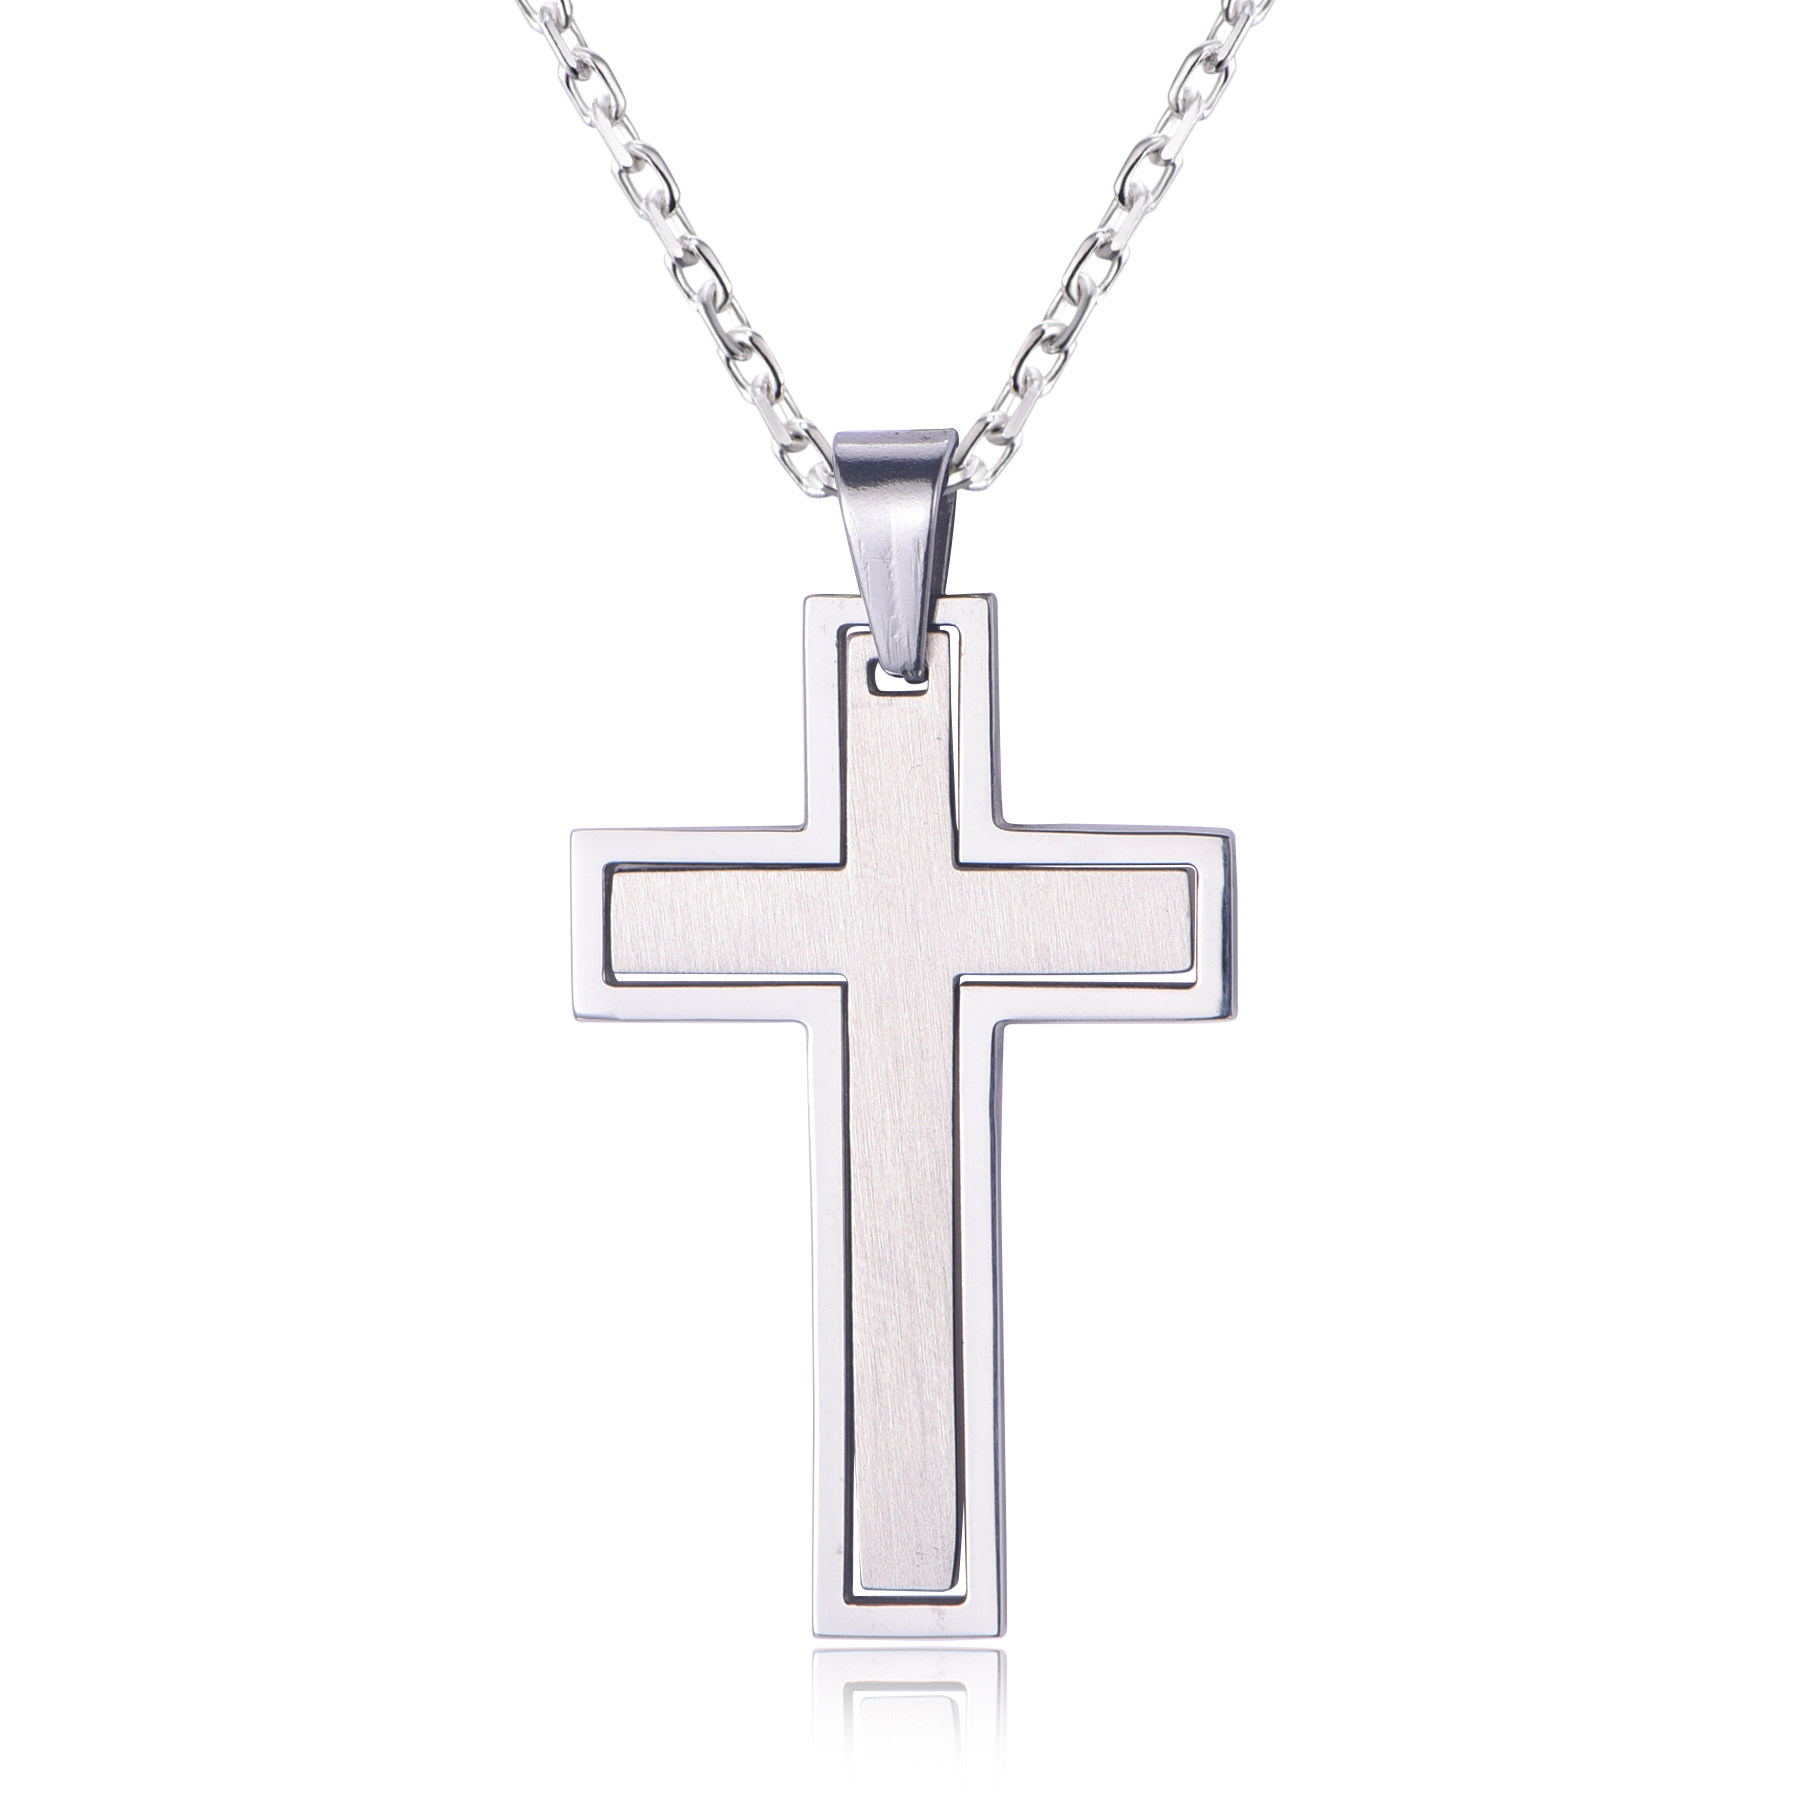 Stainless Steel Classic Satin Cross Charm Pendant Necklace NJ-14